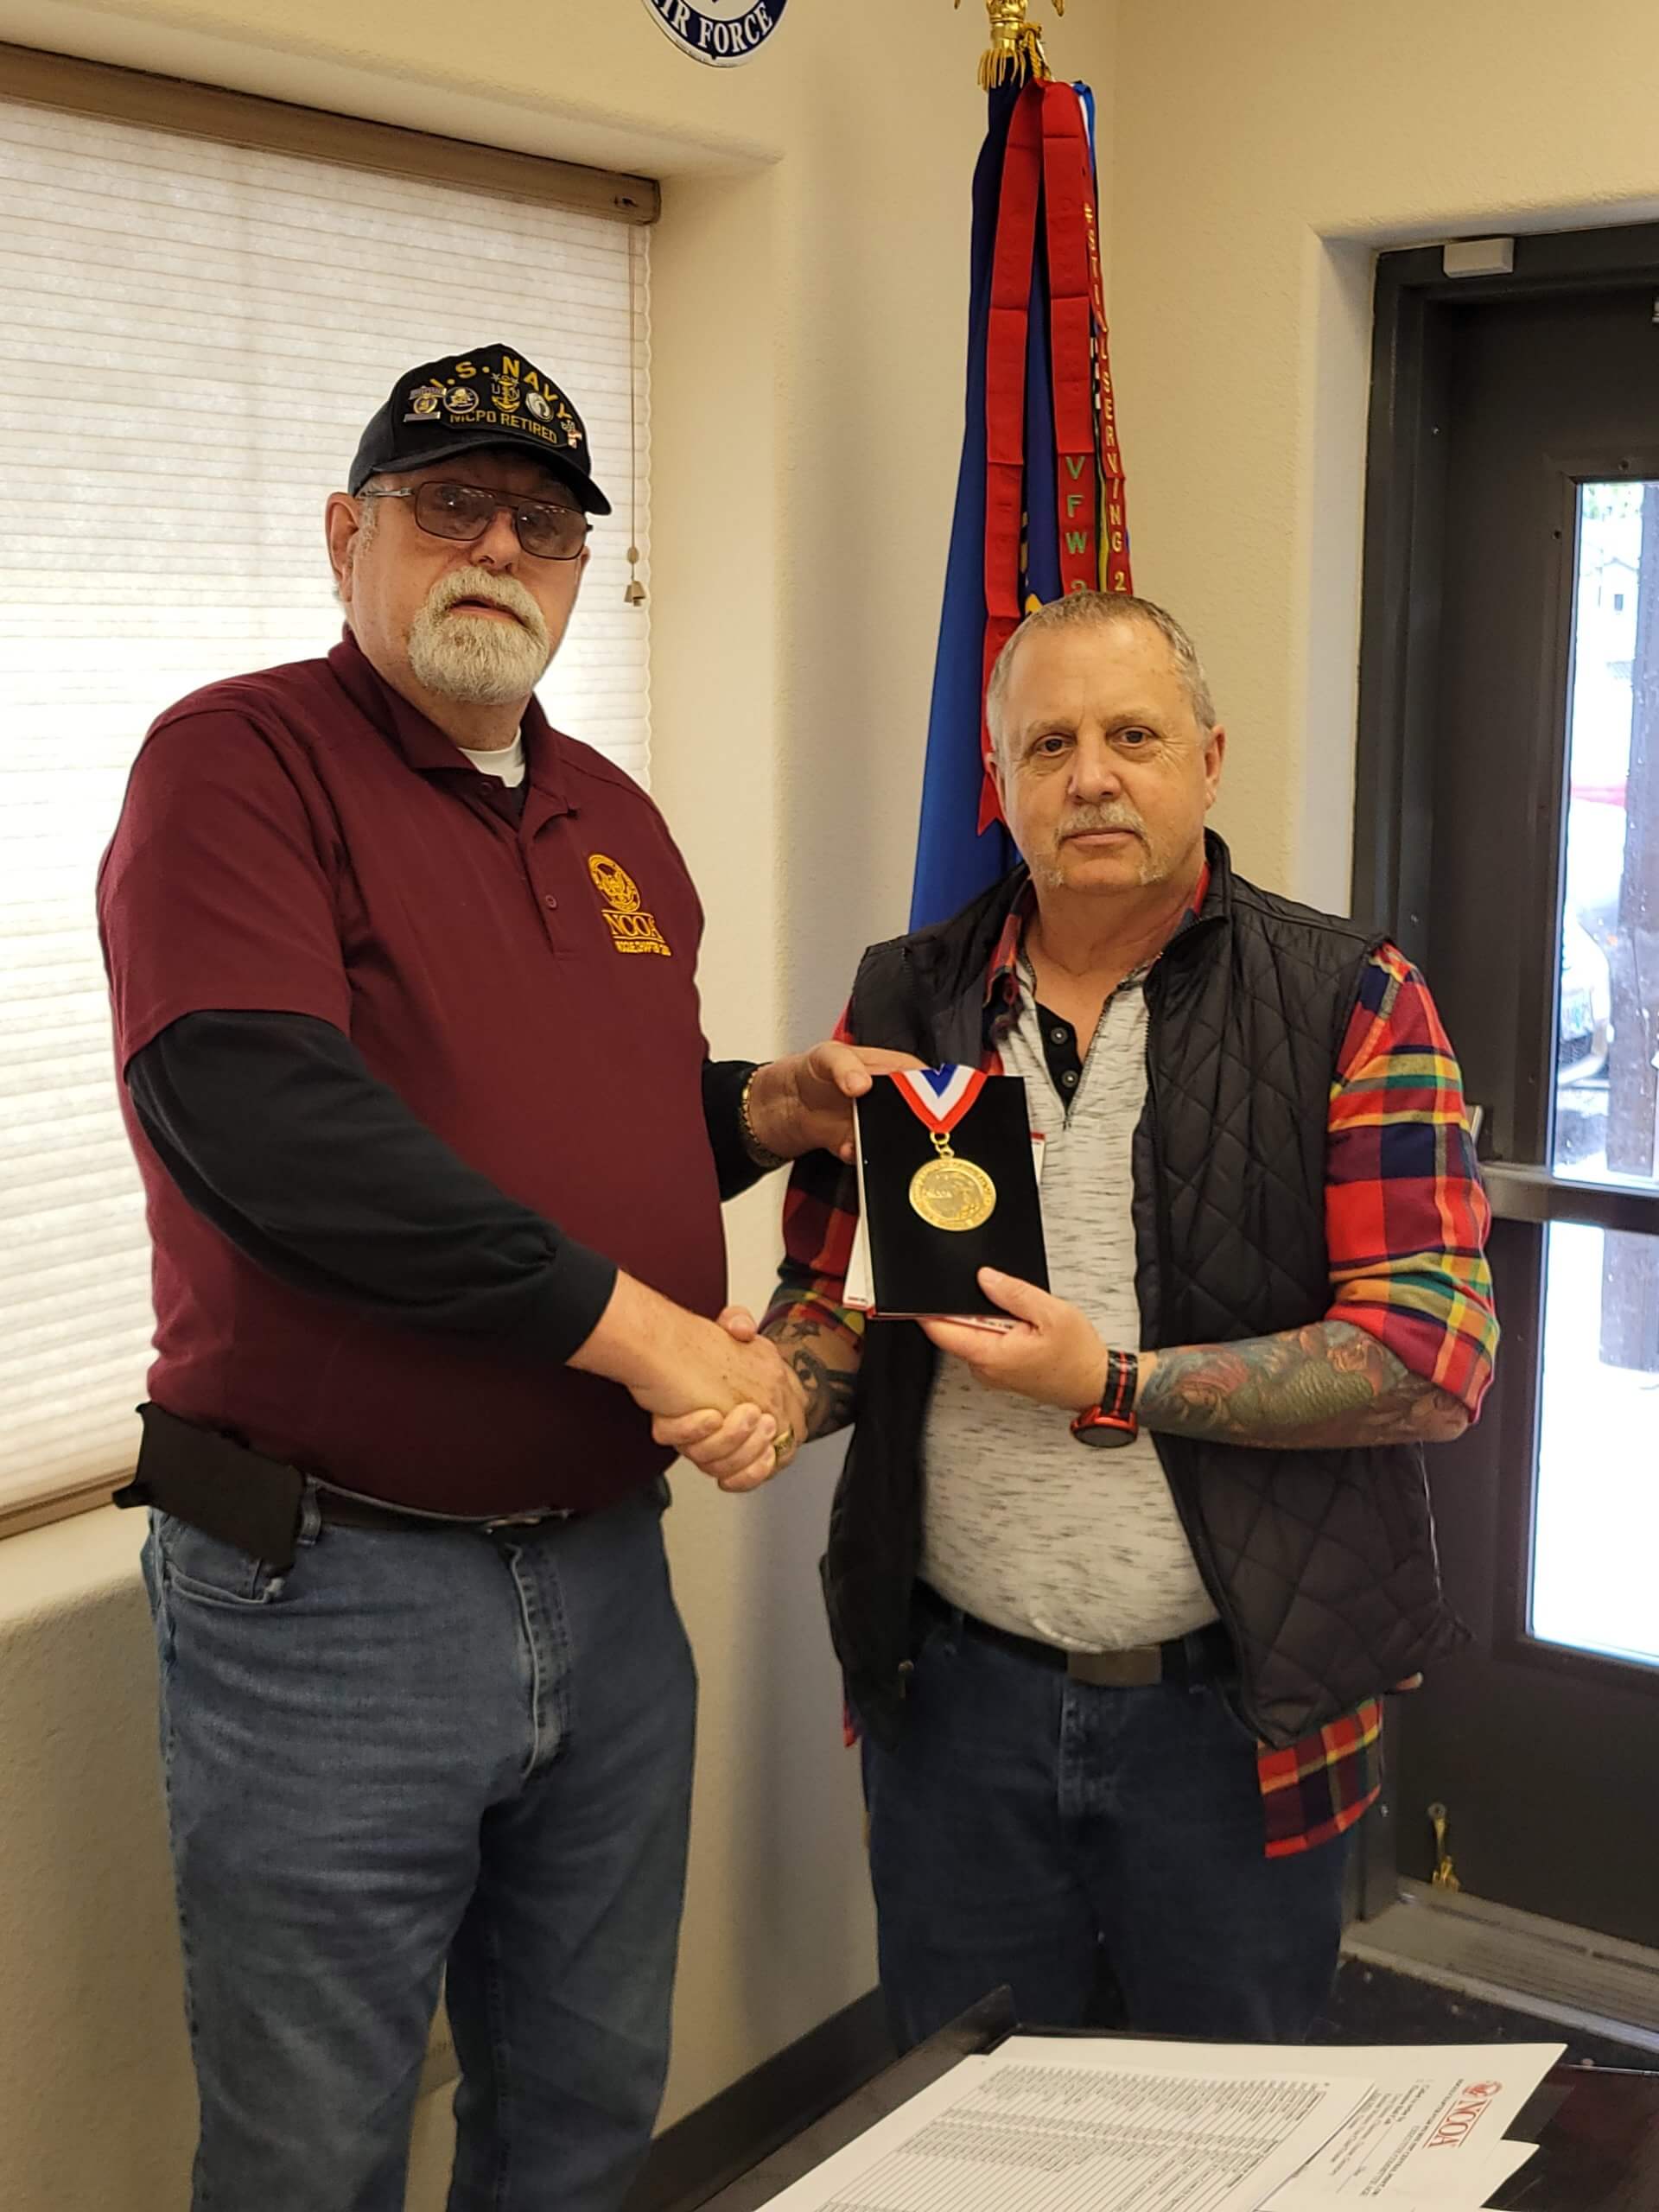 Chairman Terry Haines presents WW2 Medallion to Rogue Chapter trustee Paul Mills, son of Army veteran Scott Mills at our monthly Executive meeting.